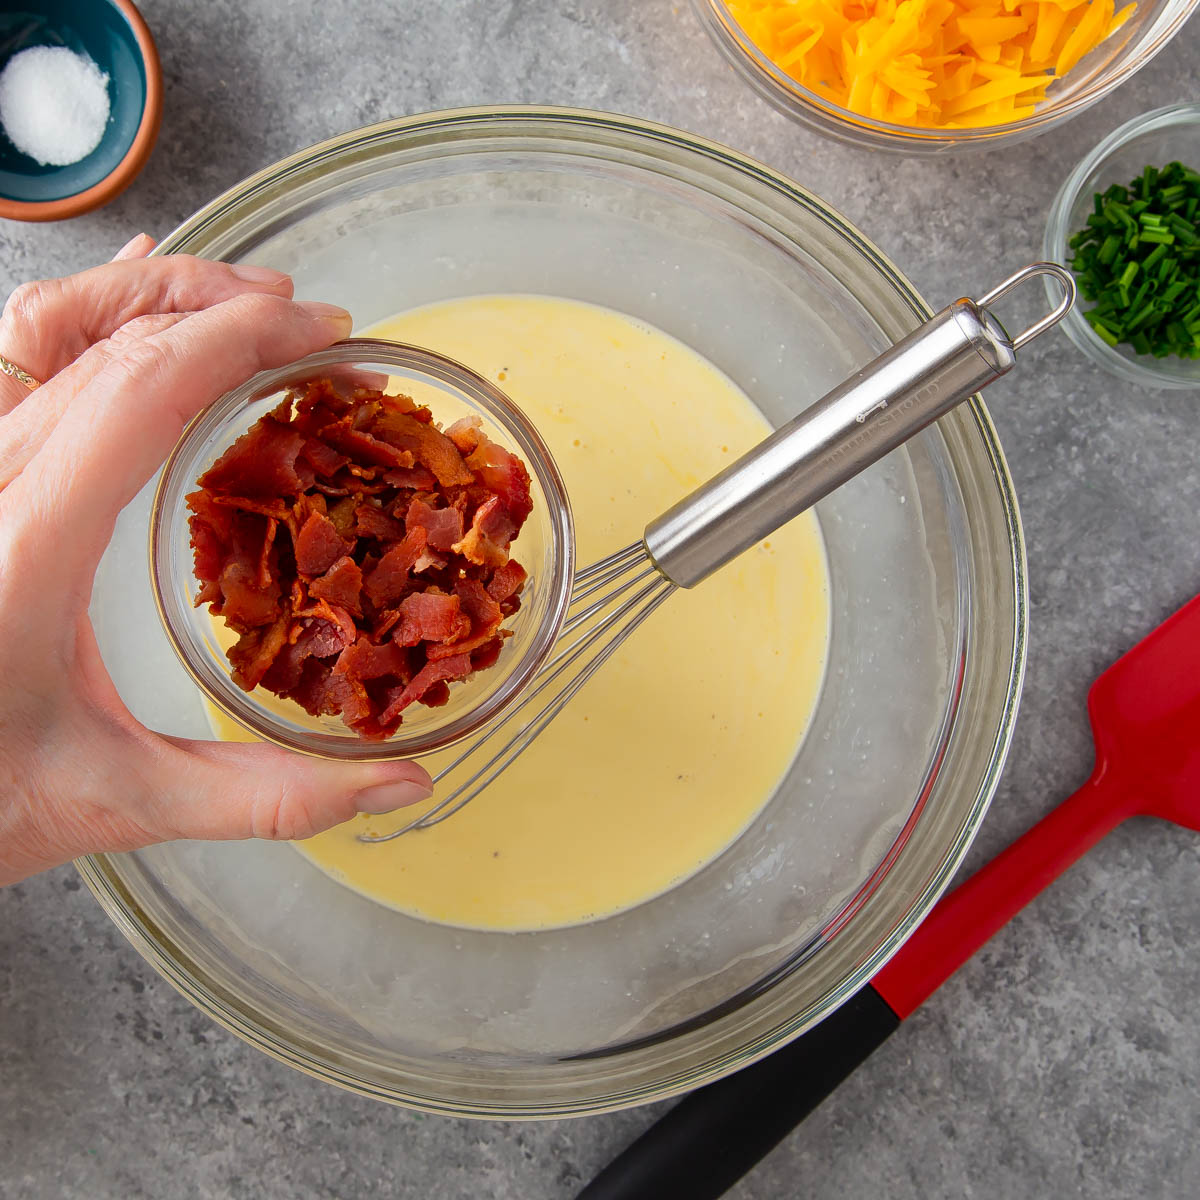 adding cooked bacon to quiche mixture